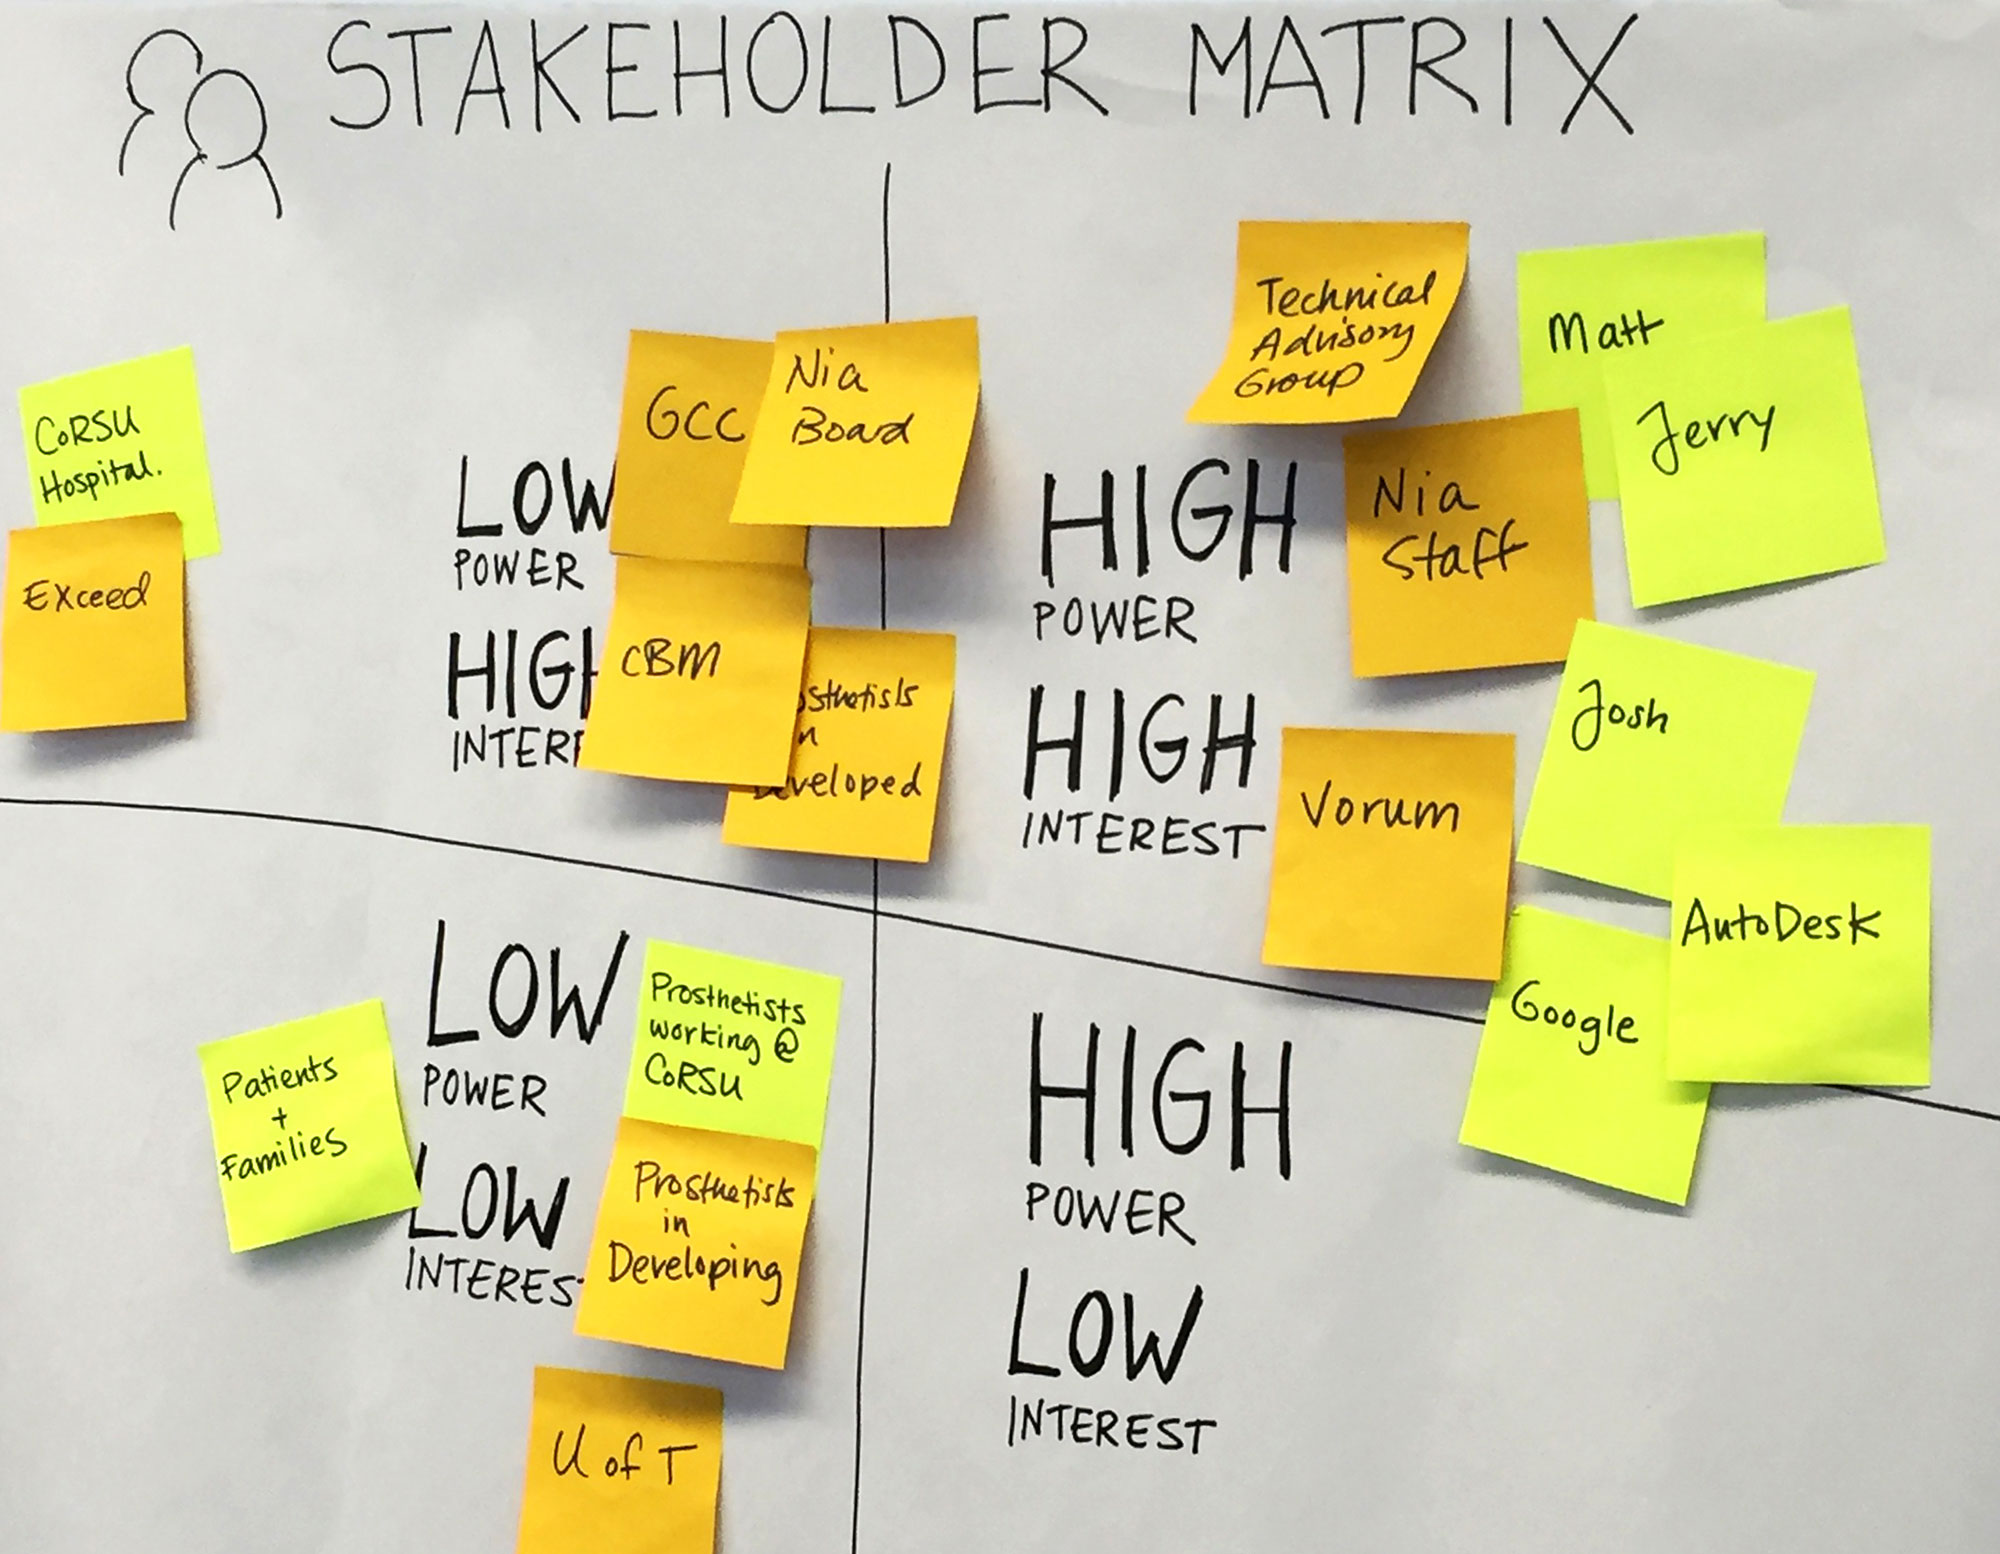 Stakeholder matrix excercise showing which stakeholder organizations have Low Power High Interest, High Power High Interest, Low Power Low Interest, or High Power Low Interest.